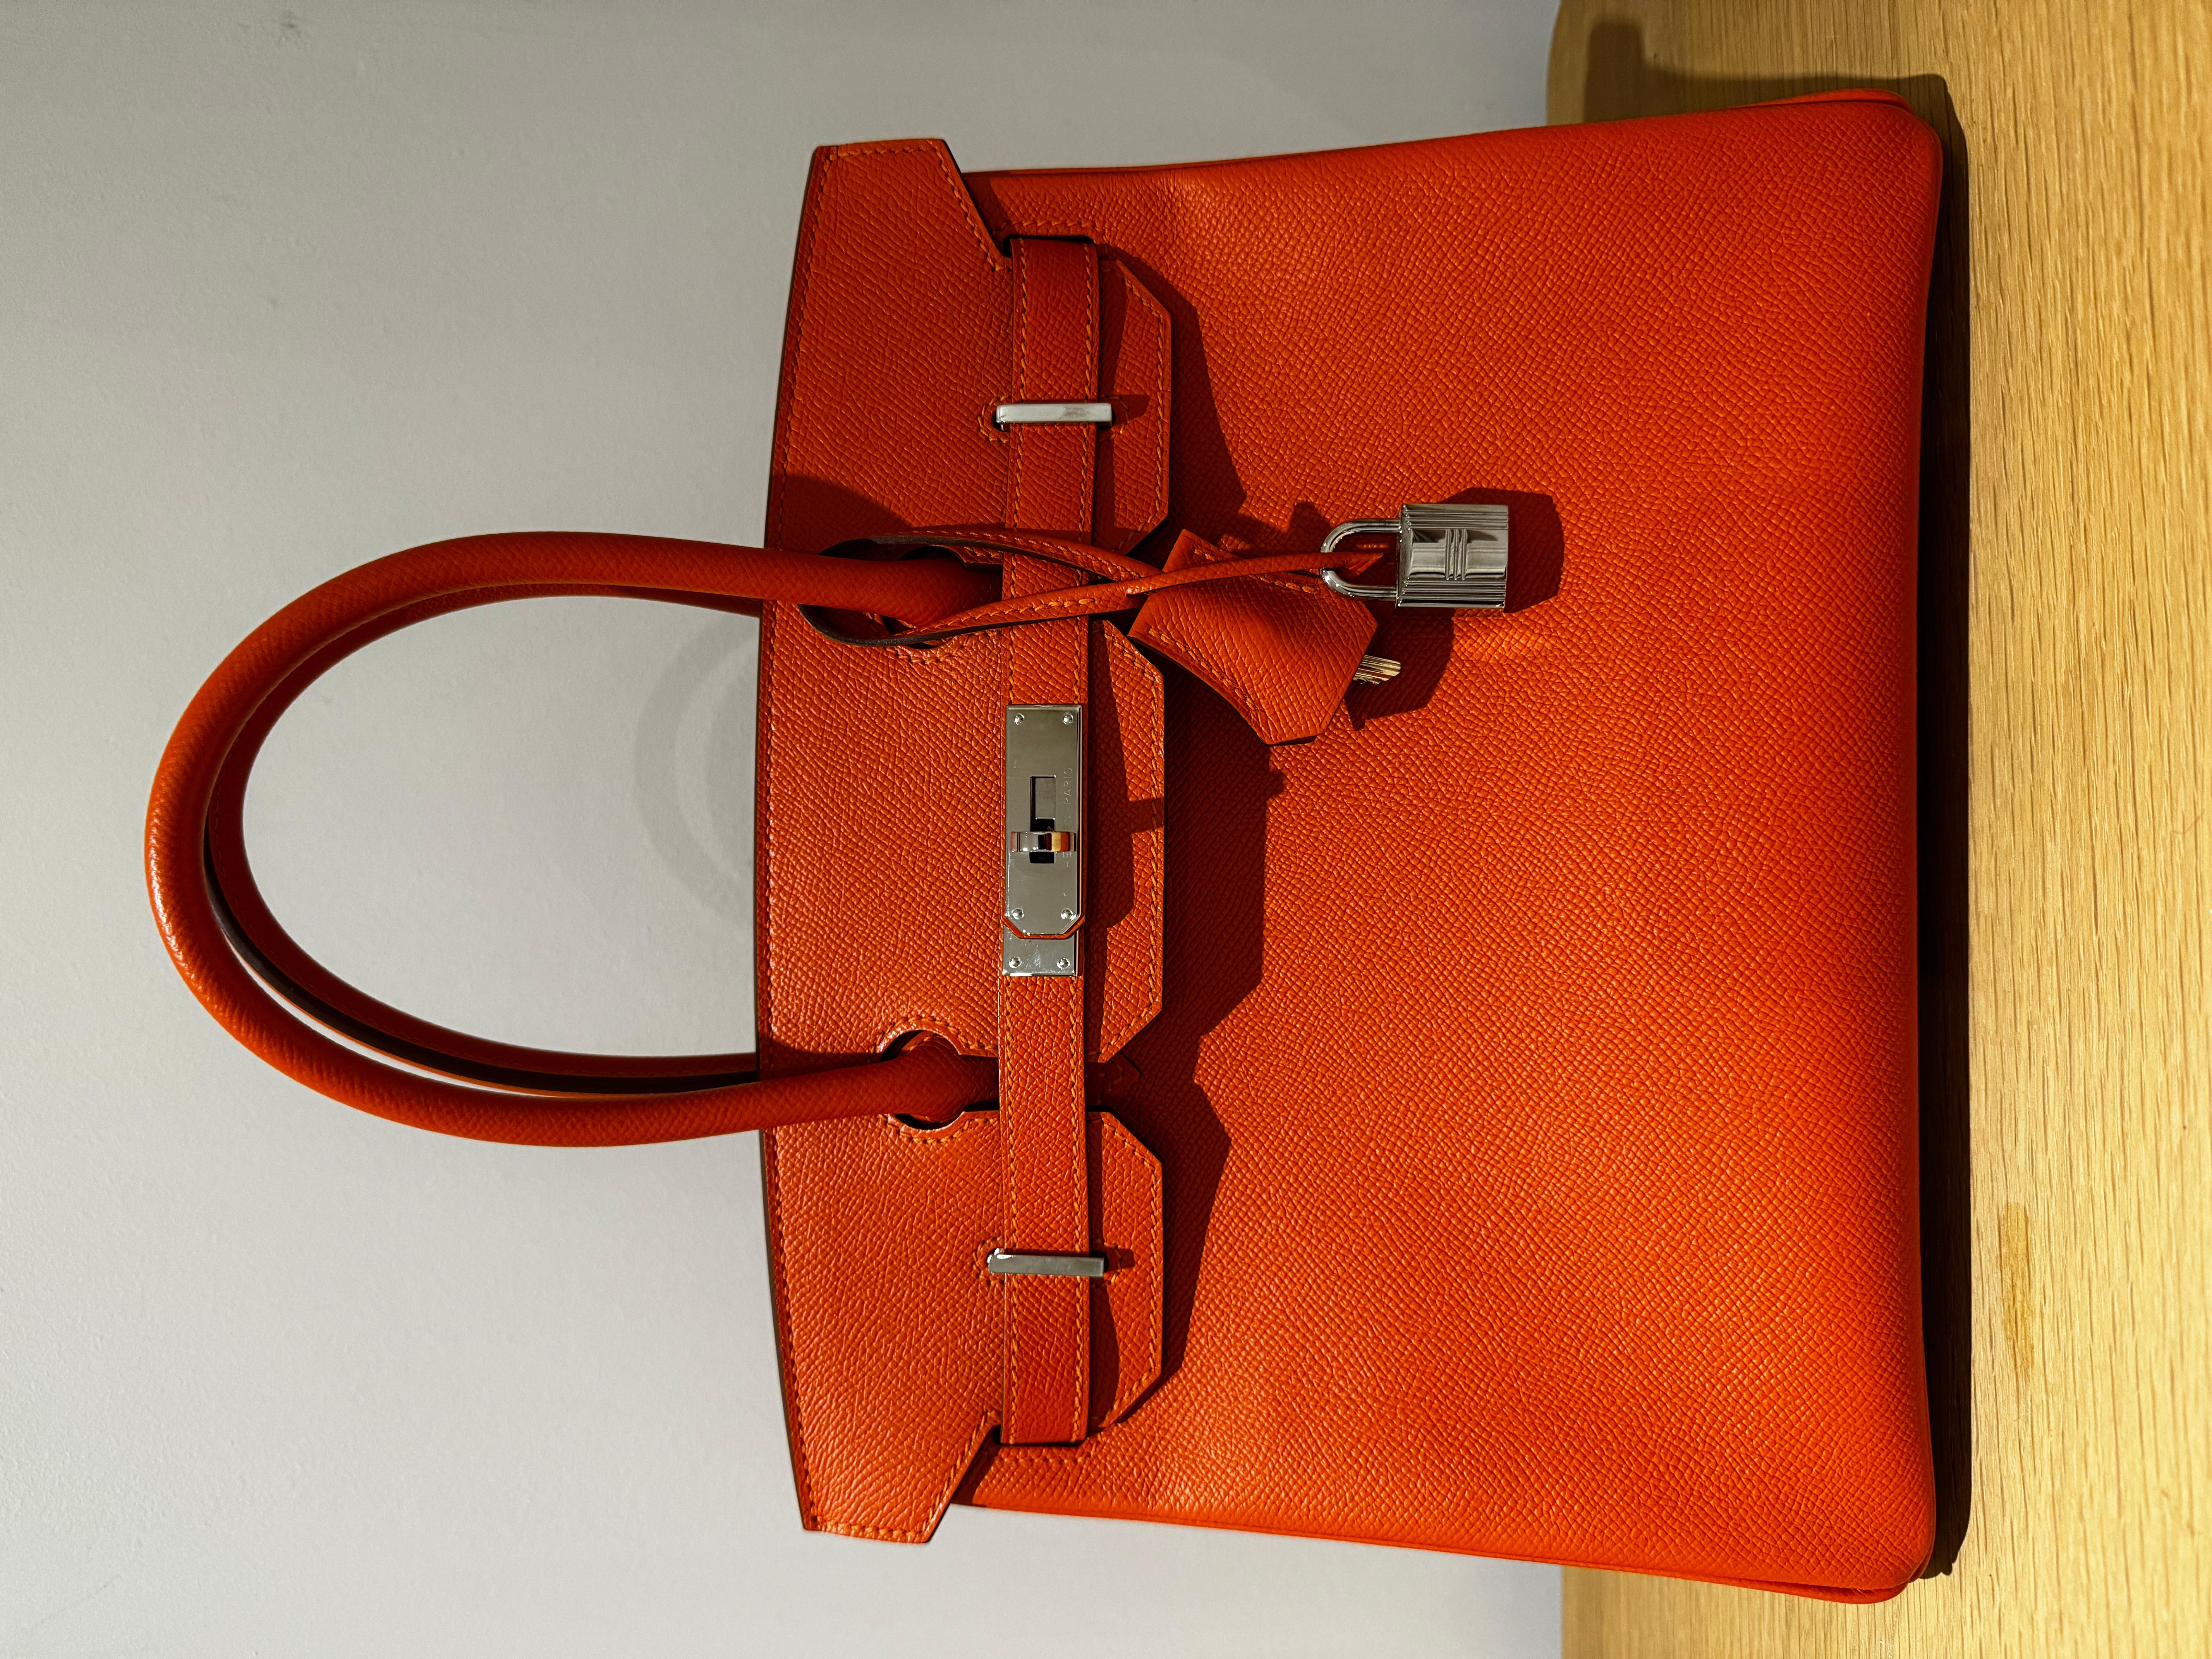 Hermes Birkin 30 Orange Epsom leather with gold hardware bag. The signature hermes colour orange. Comes with clochette, carebook, dustbag and box. 